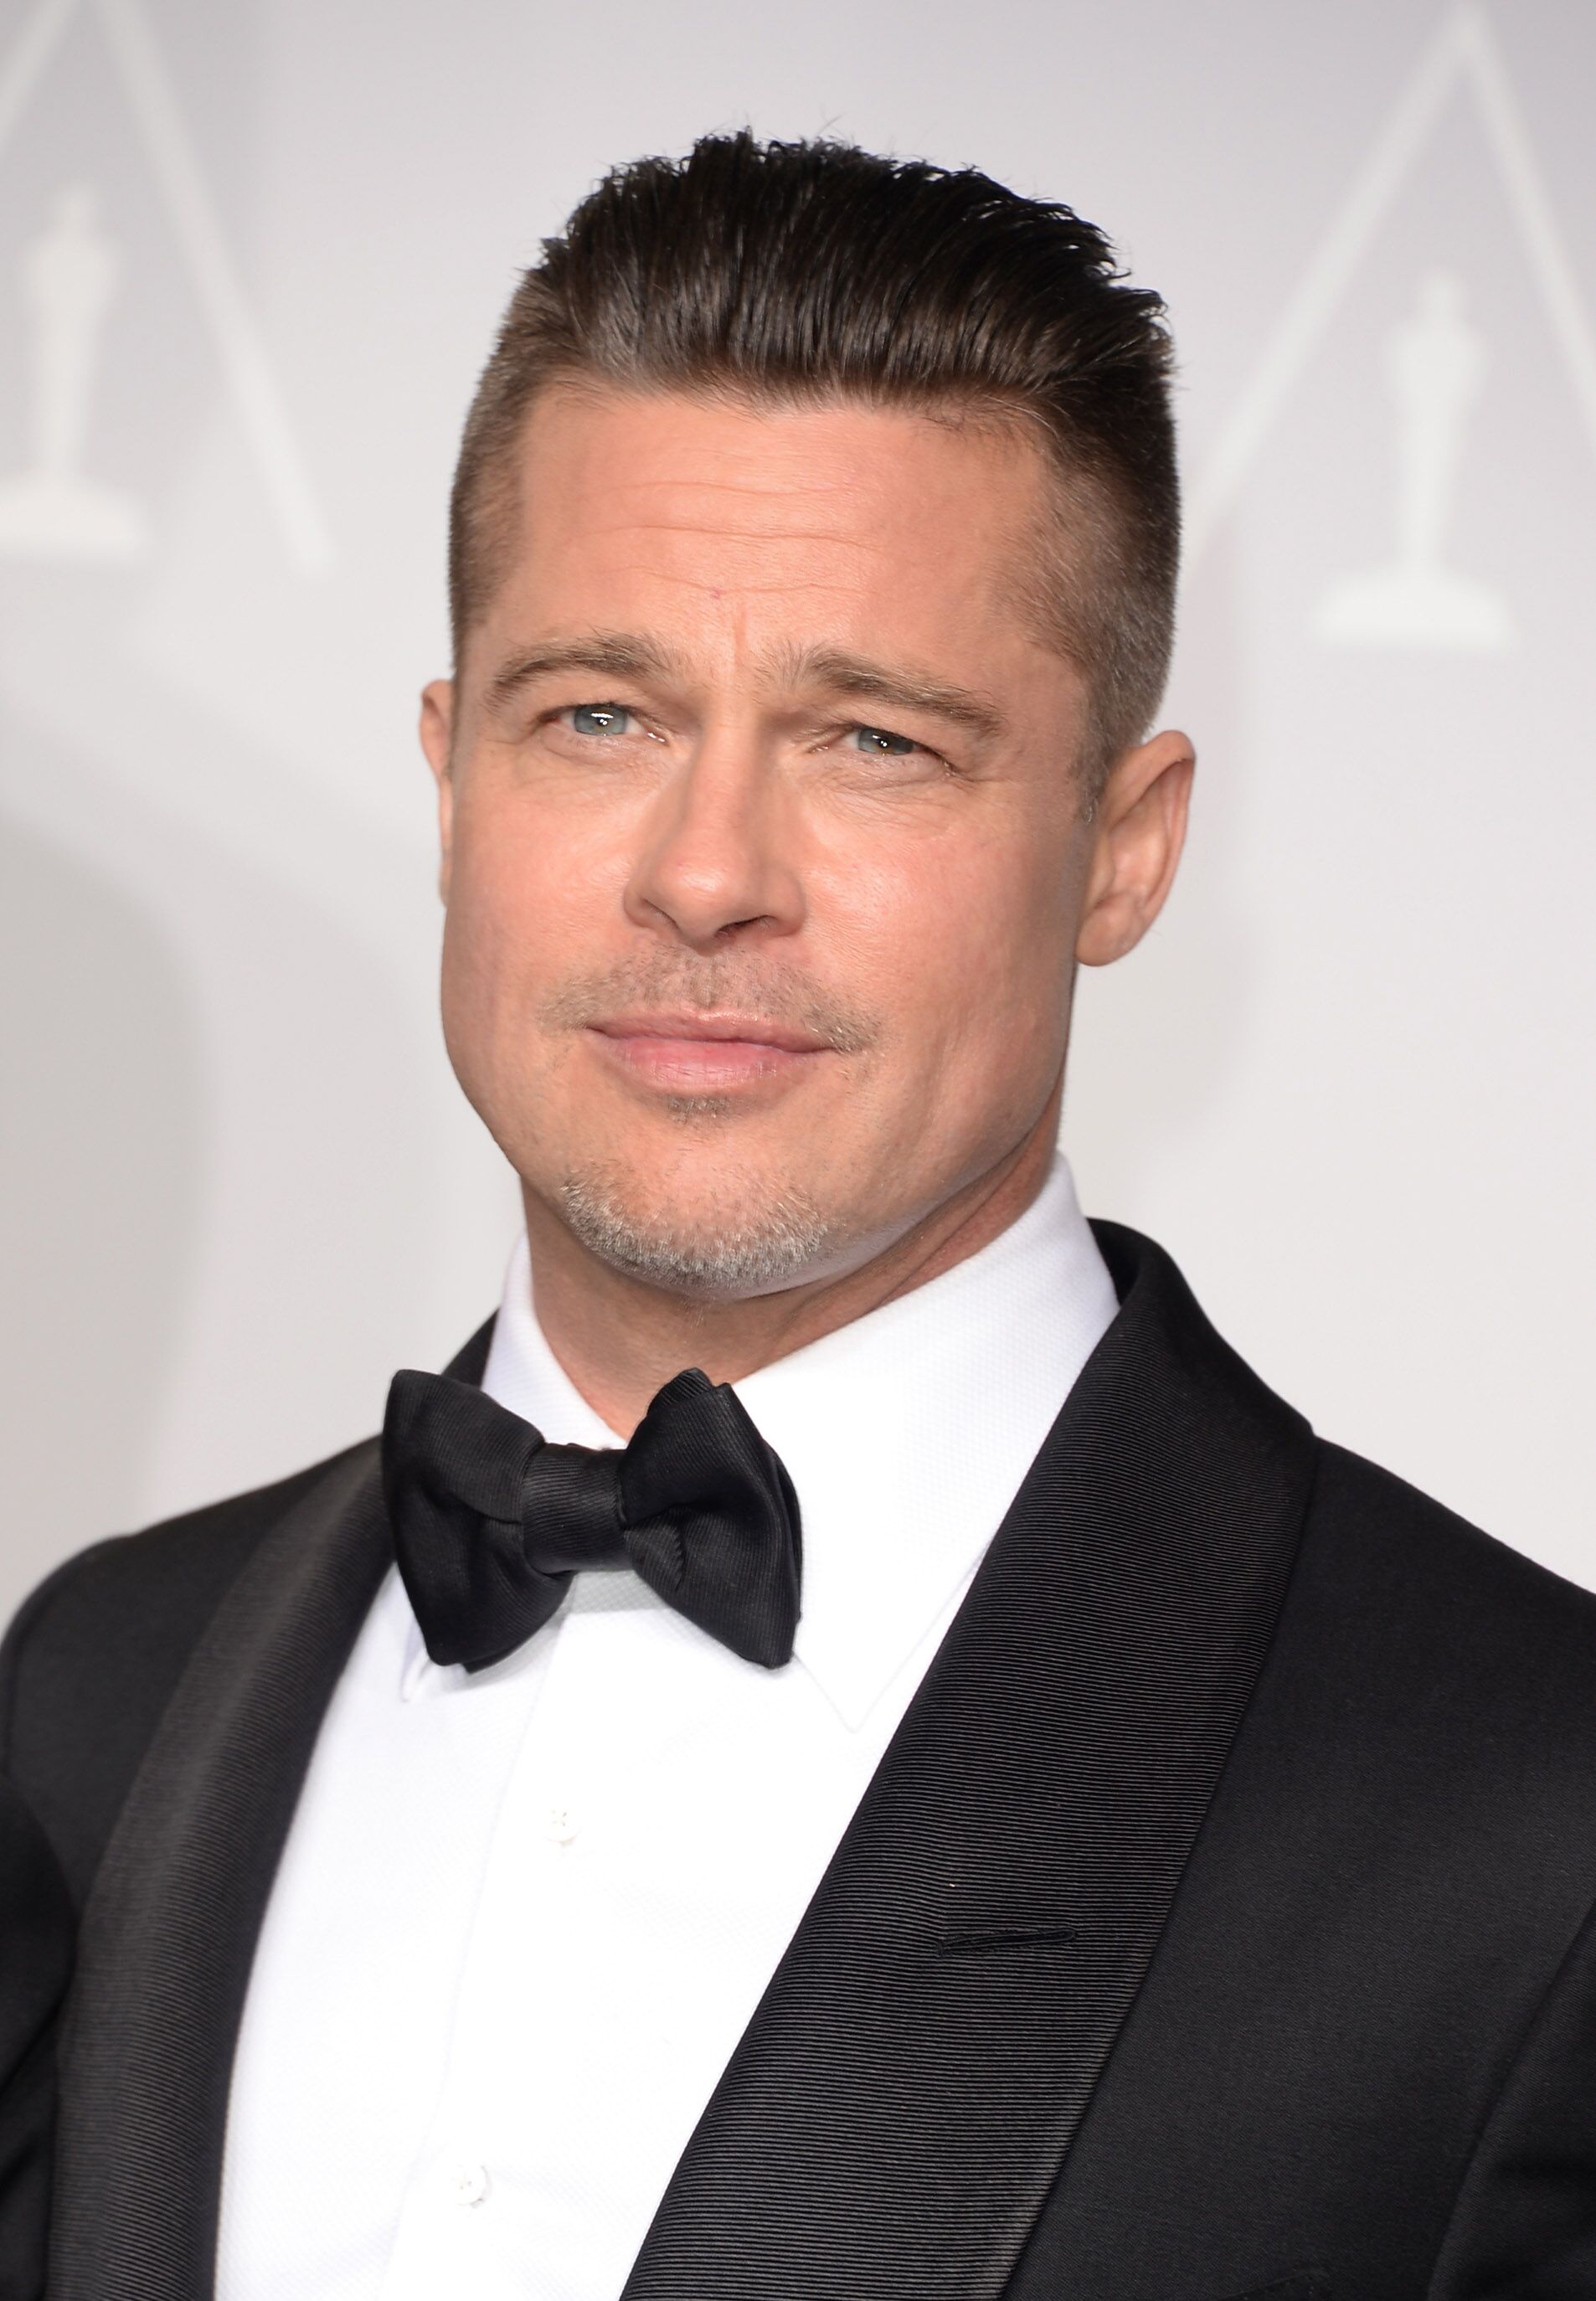 Producer Brad Pitt, winner of Best Picture for "12 Years a Slave", poses in the press room during the Oscars at Loews Hollywood Hotel on March 2, 2014 in Hollywood, California. | Photo: Getty Images